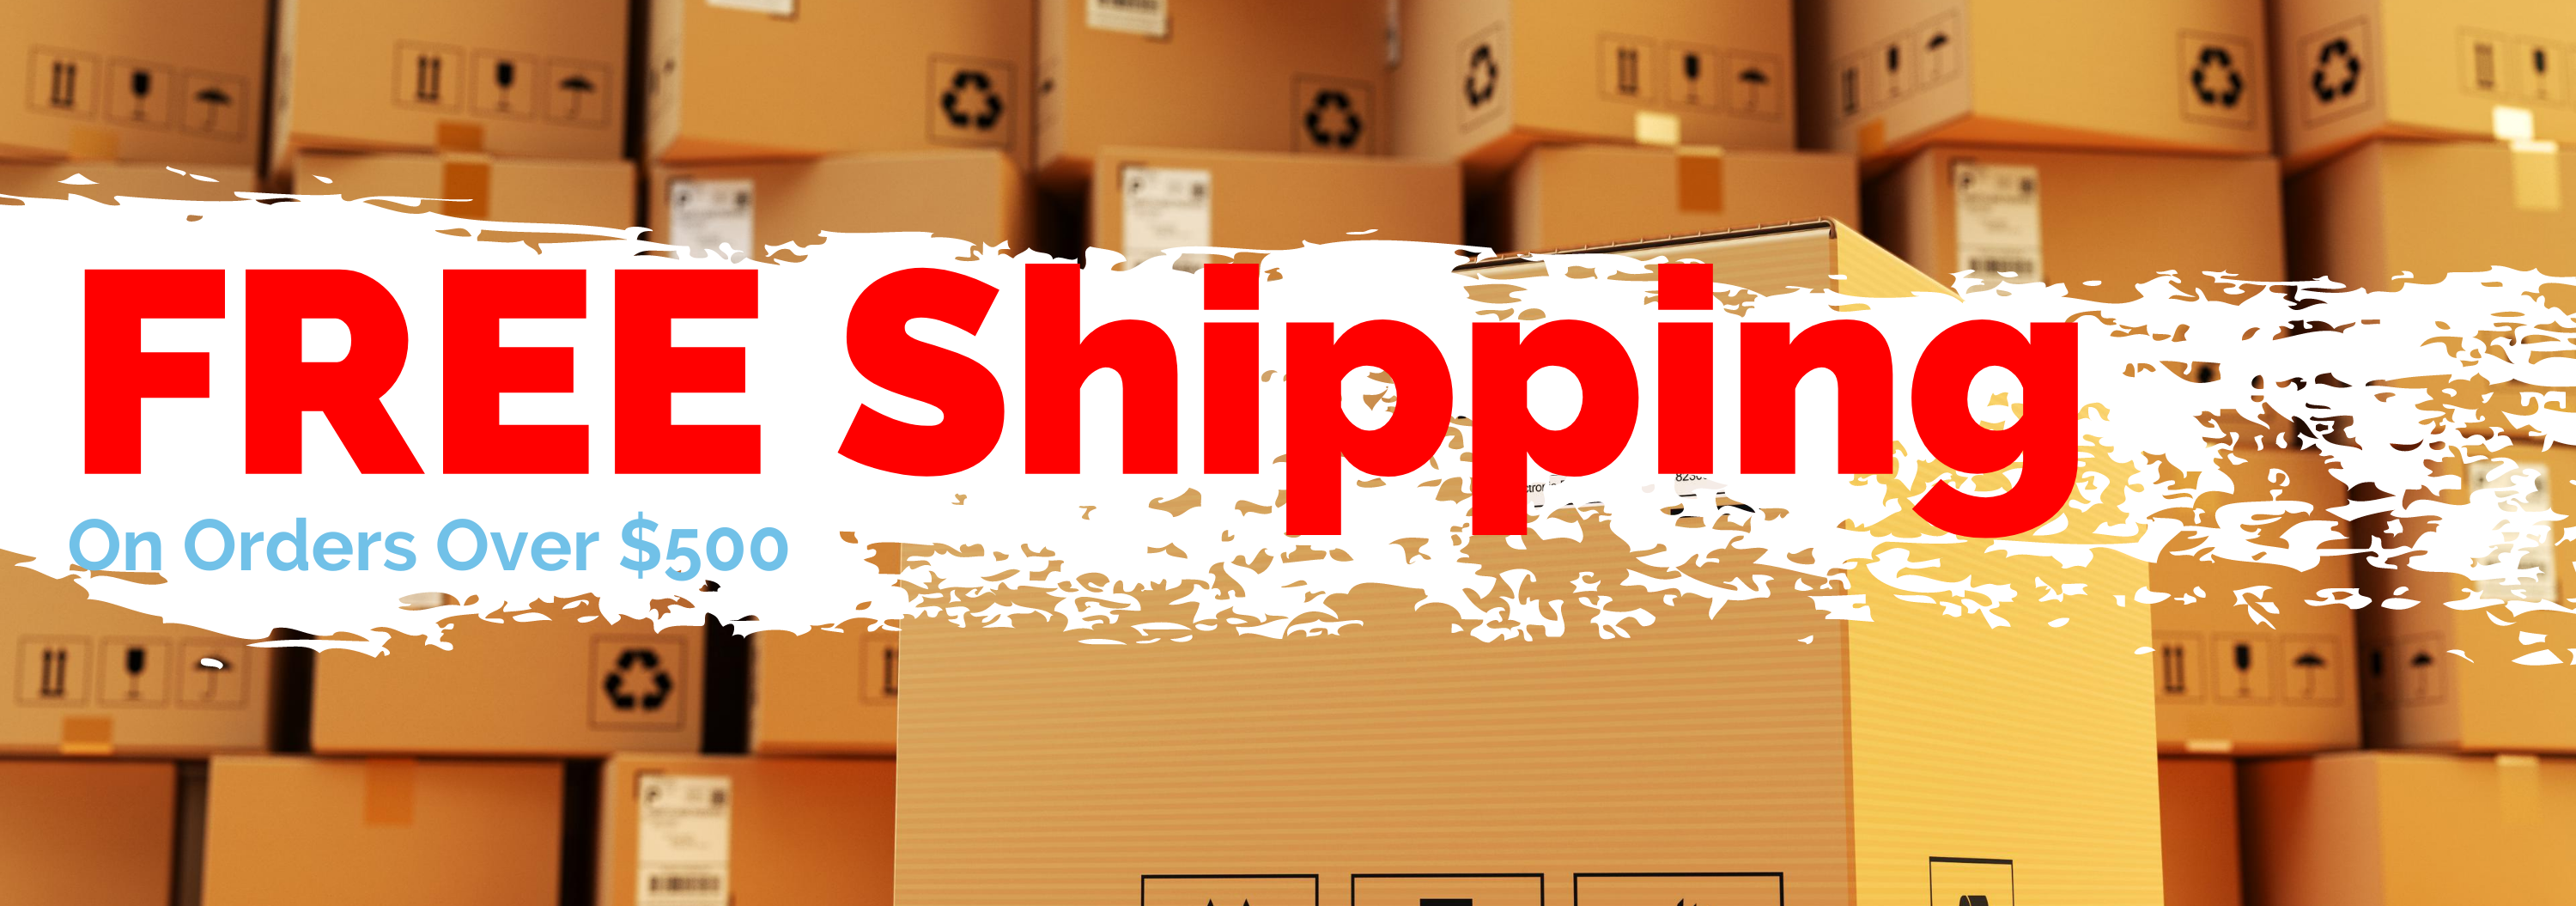 FREE SHIPPING On Orders Over $500